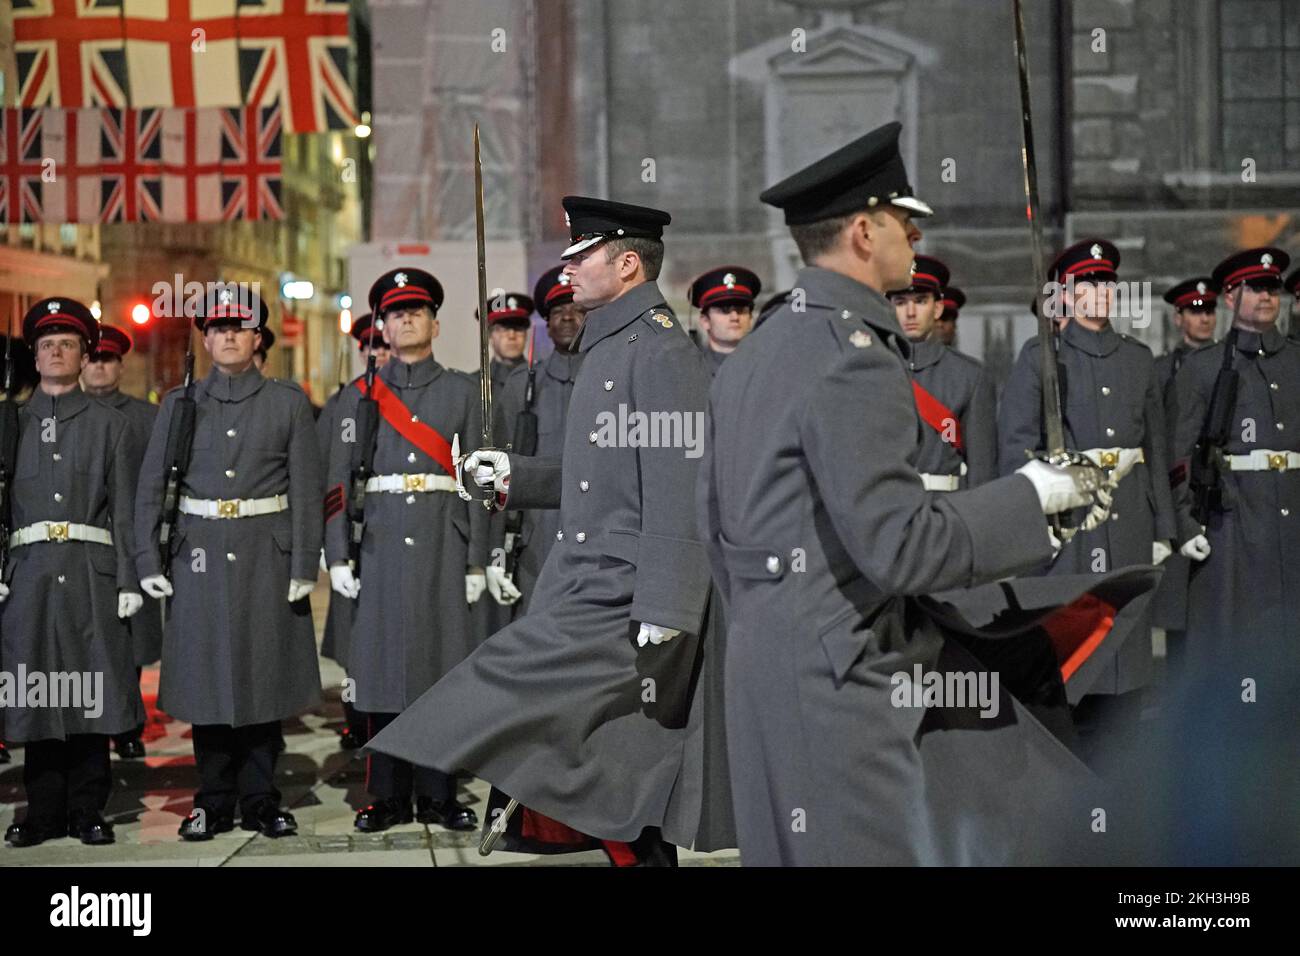 The Honourable Artillery company give a guard of honour to President Cyril Ramaphosa of South Africa as he arrives for a banquet at the Guildhall in London, given by the Lord Mayor and City of London Corporation, during his state visit to the UK. Picture date: Wednesday November 23, 2022. Stock Photo